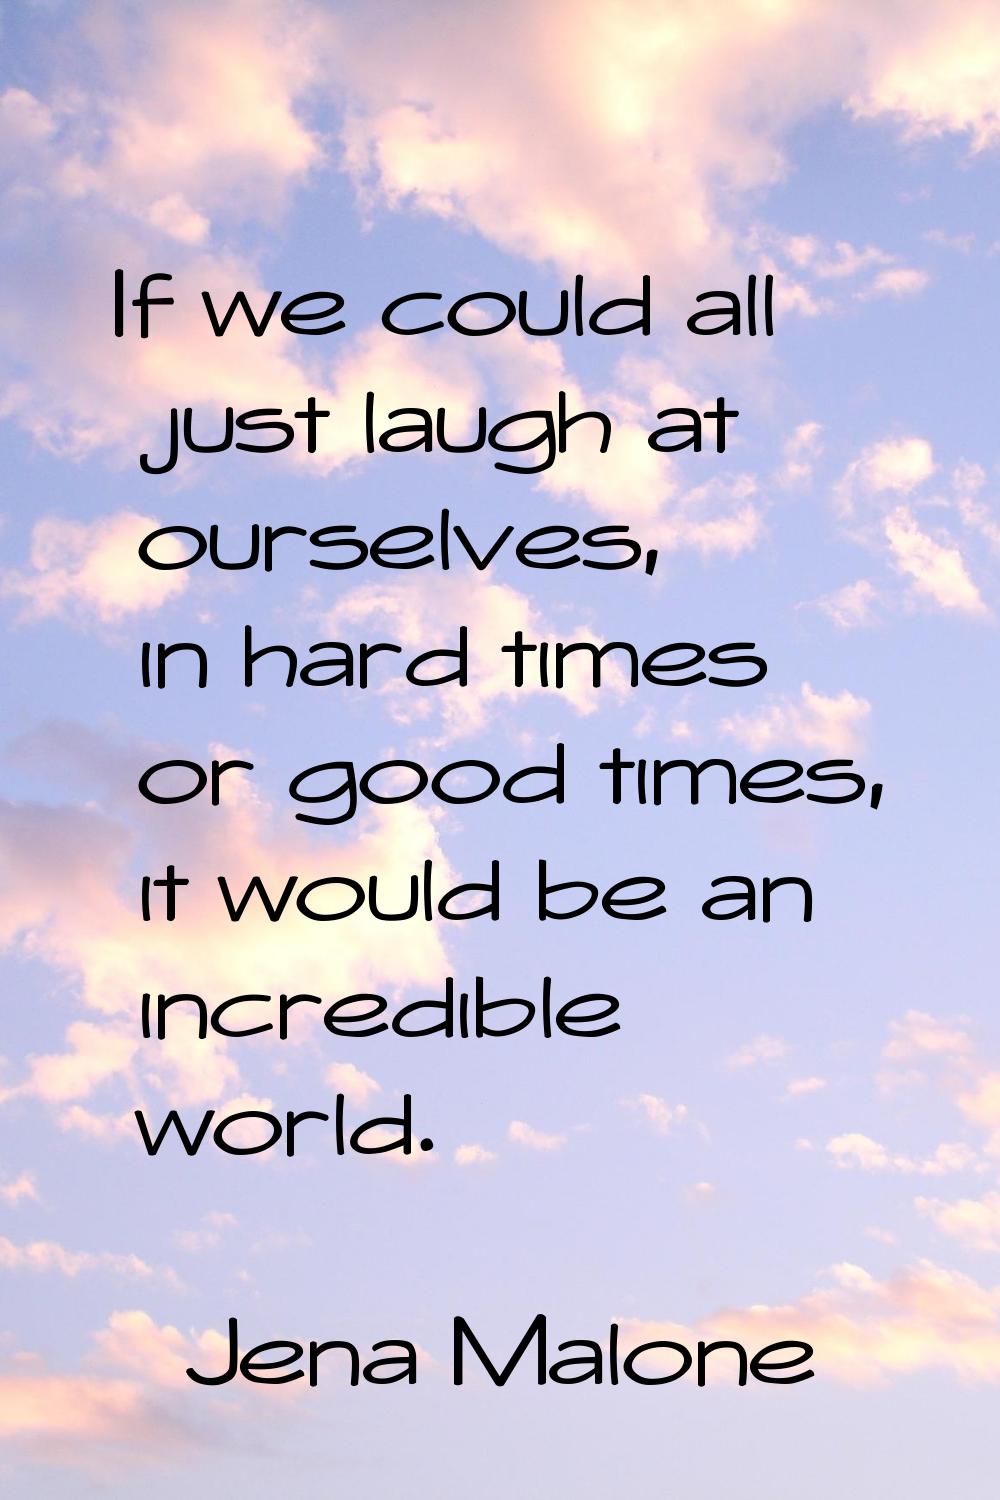 If we could all just laugh at ourselves, in hard times or good times, it would be an incredible wor